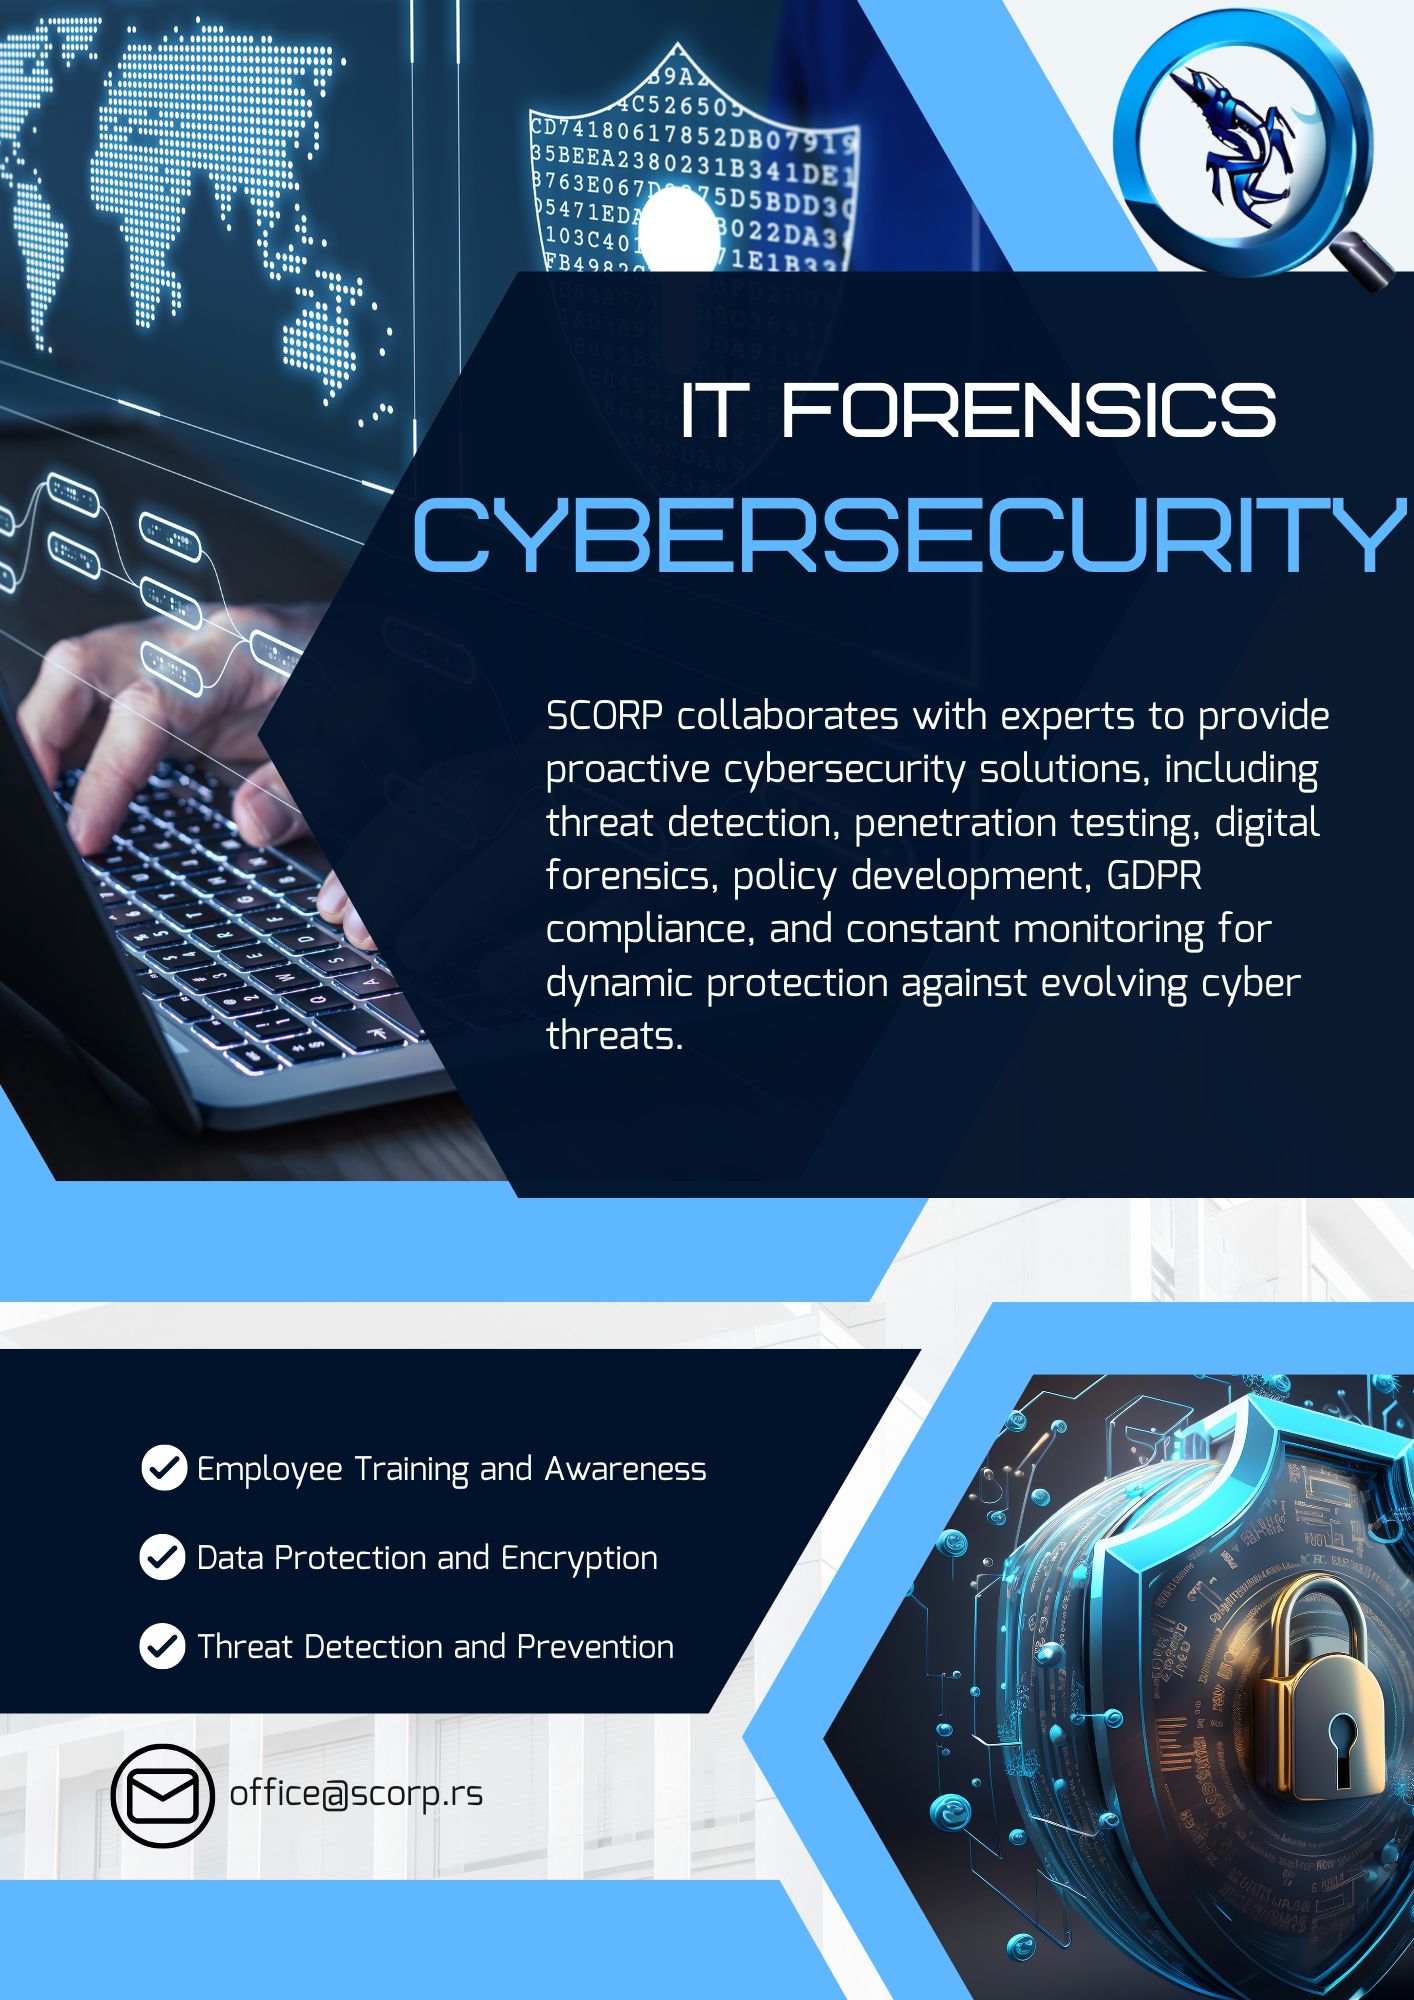 IT Forensics / Cybersecurity